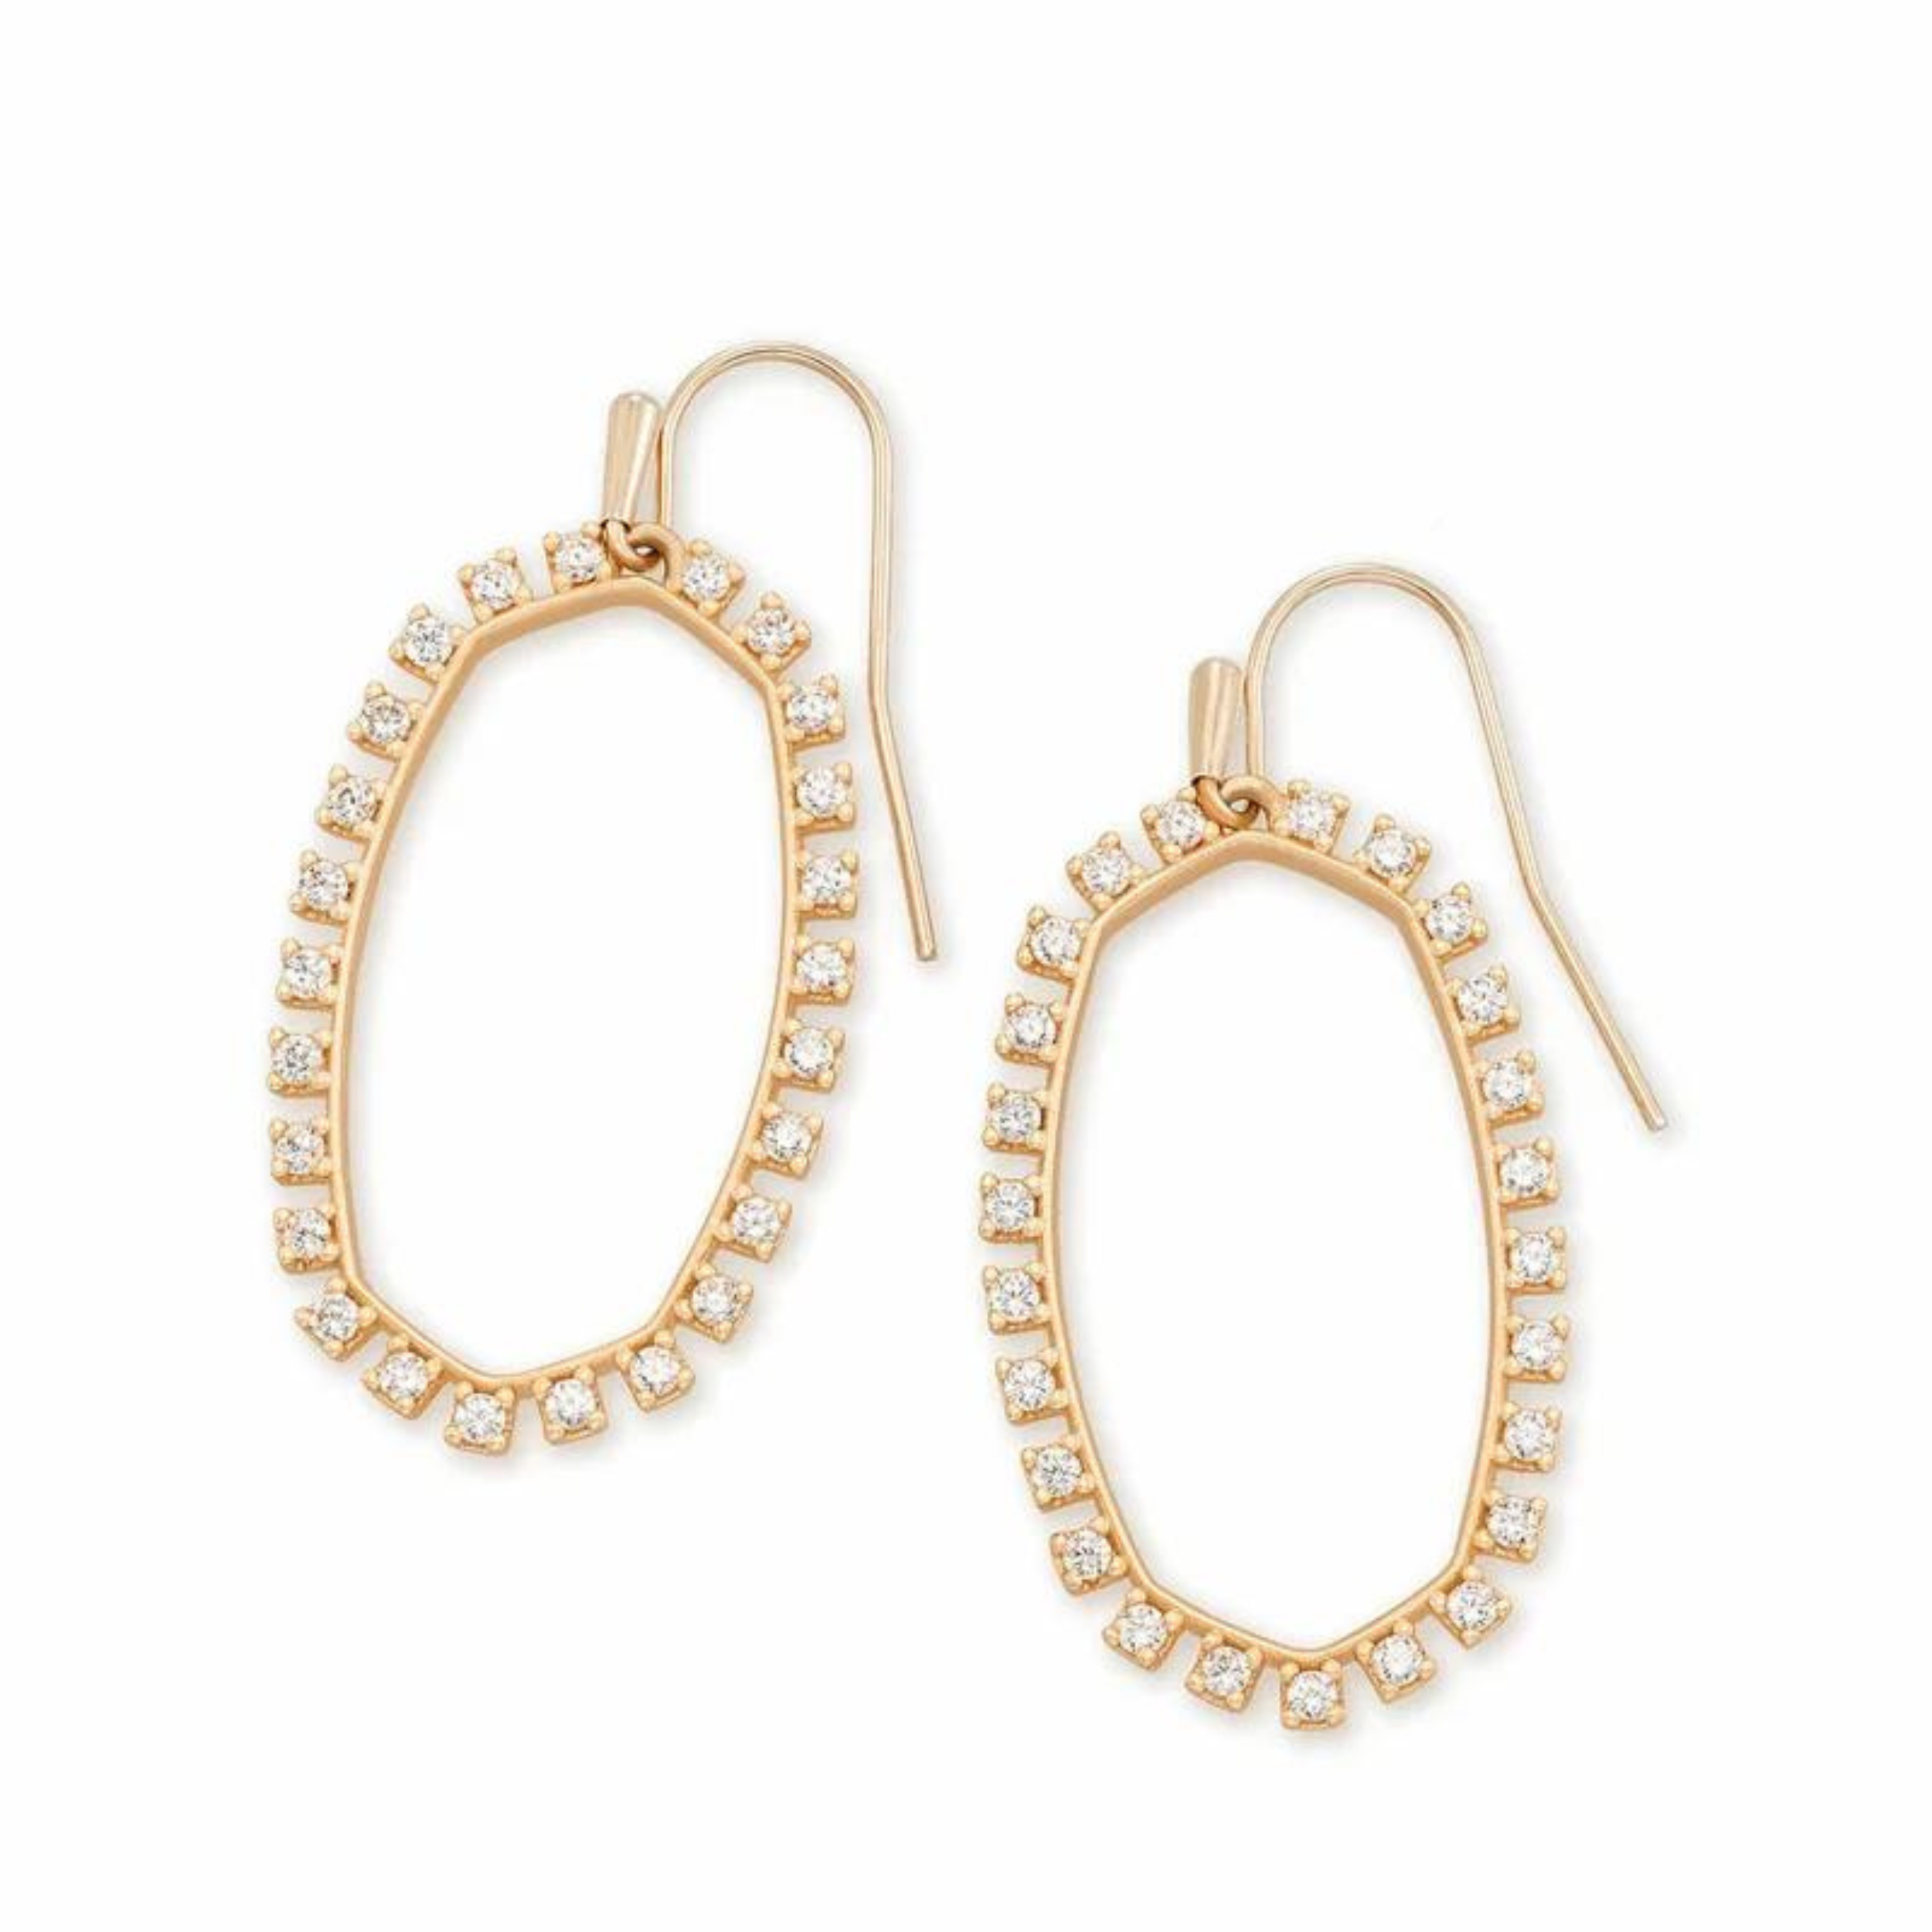 Rose gold dangle crystal earrings, pictured on a white background.